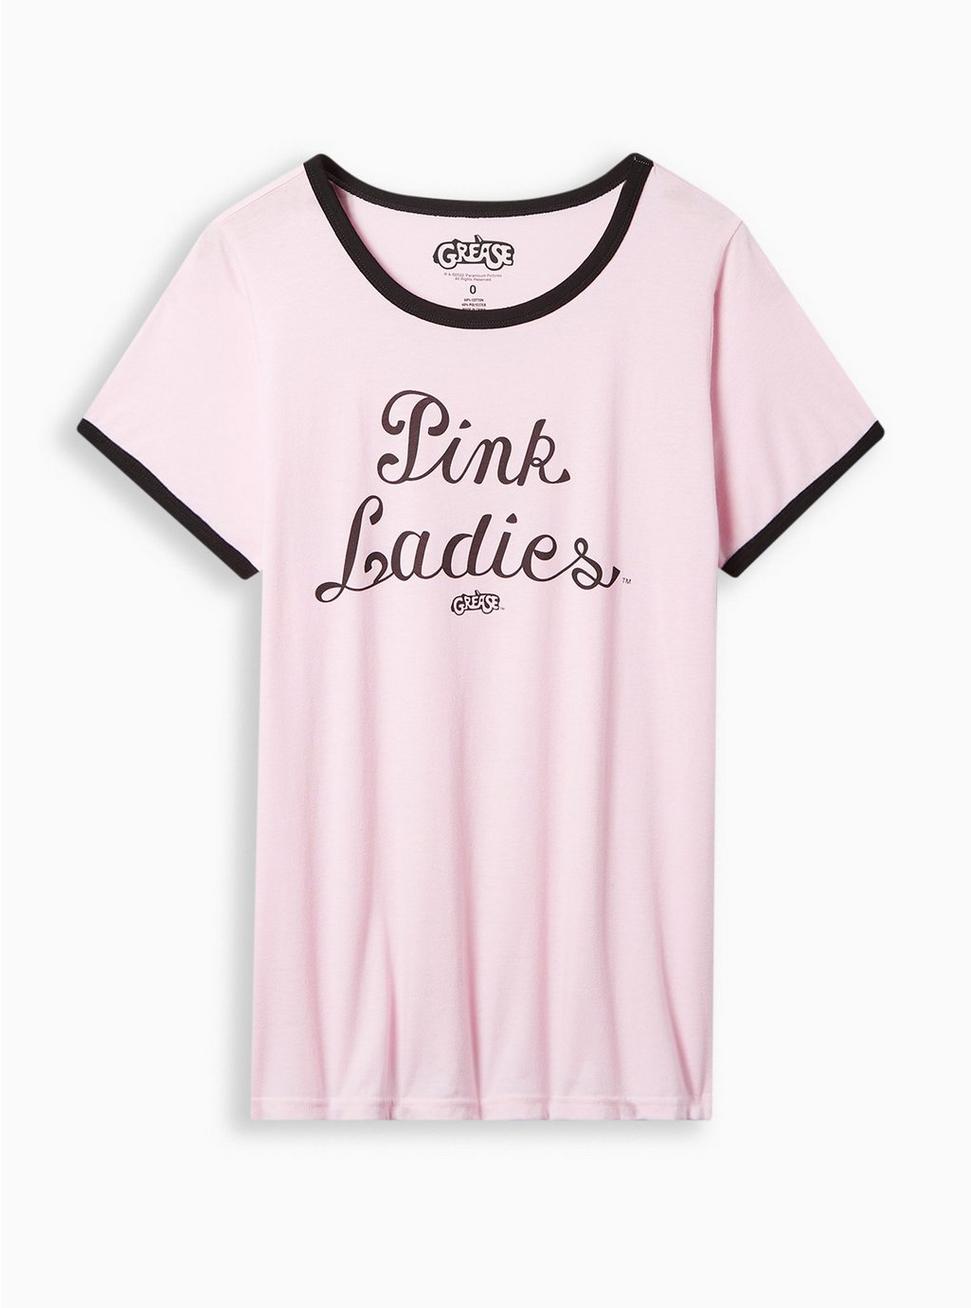 Grease Classic Fit Cotton Ringer Tee, PINK, hi-res